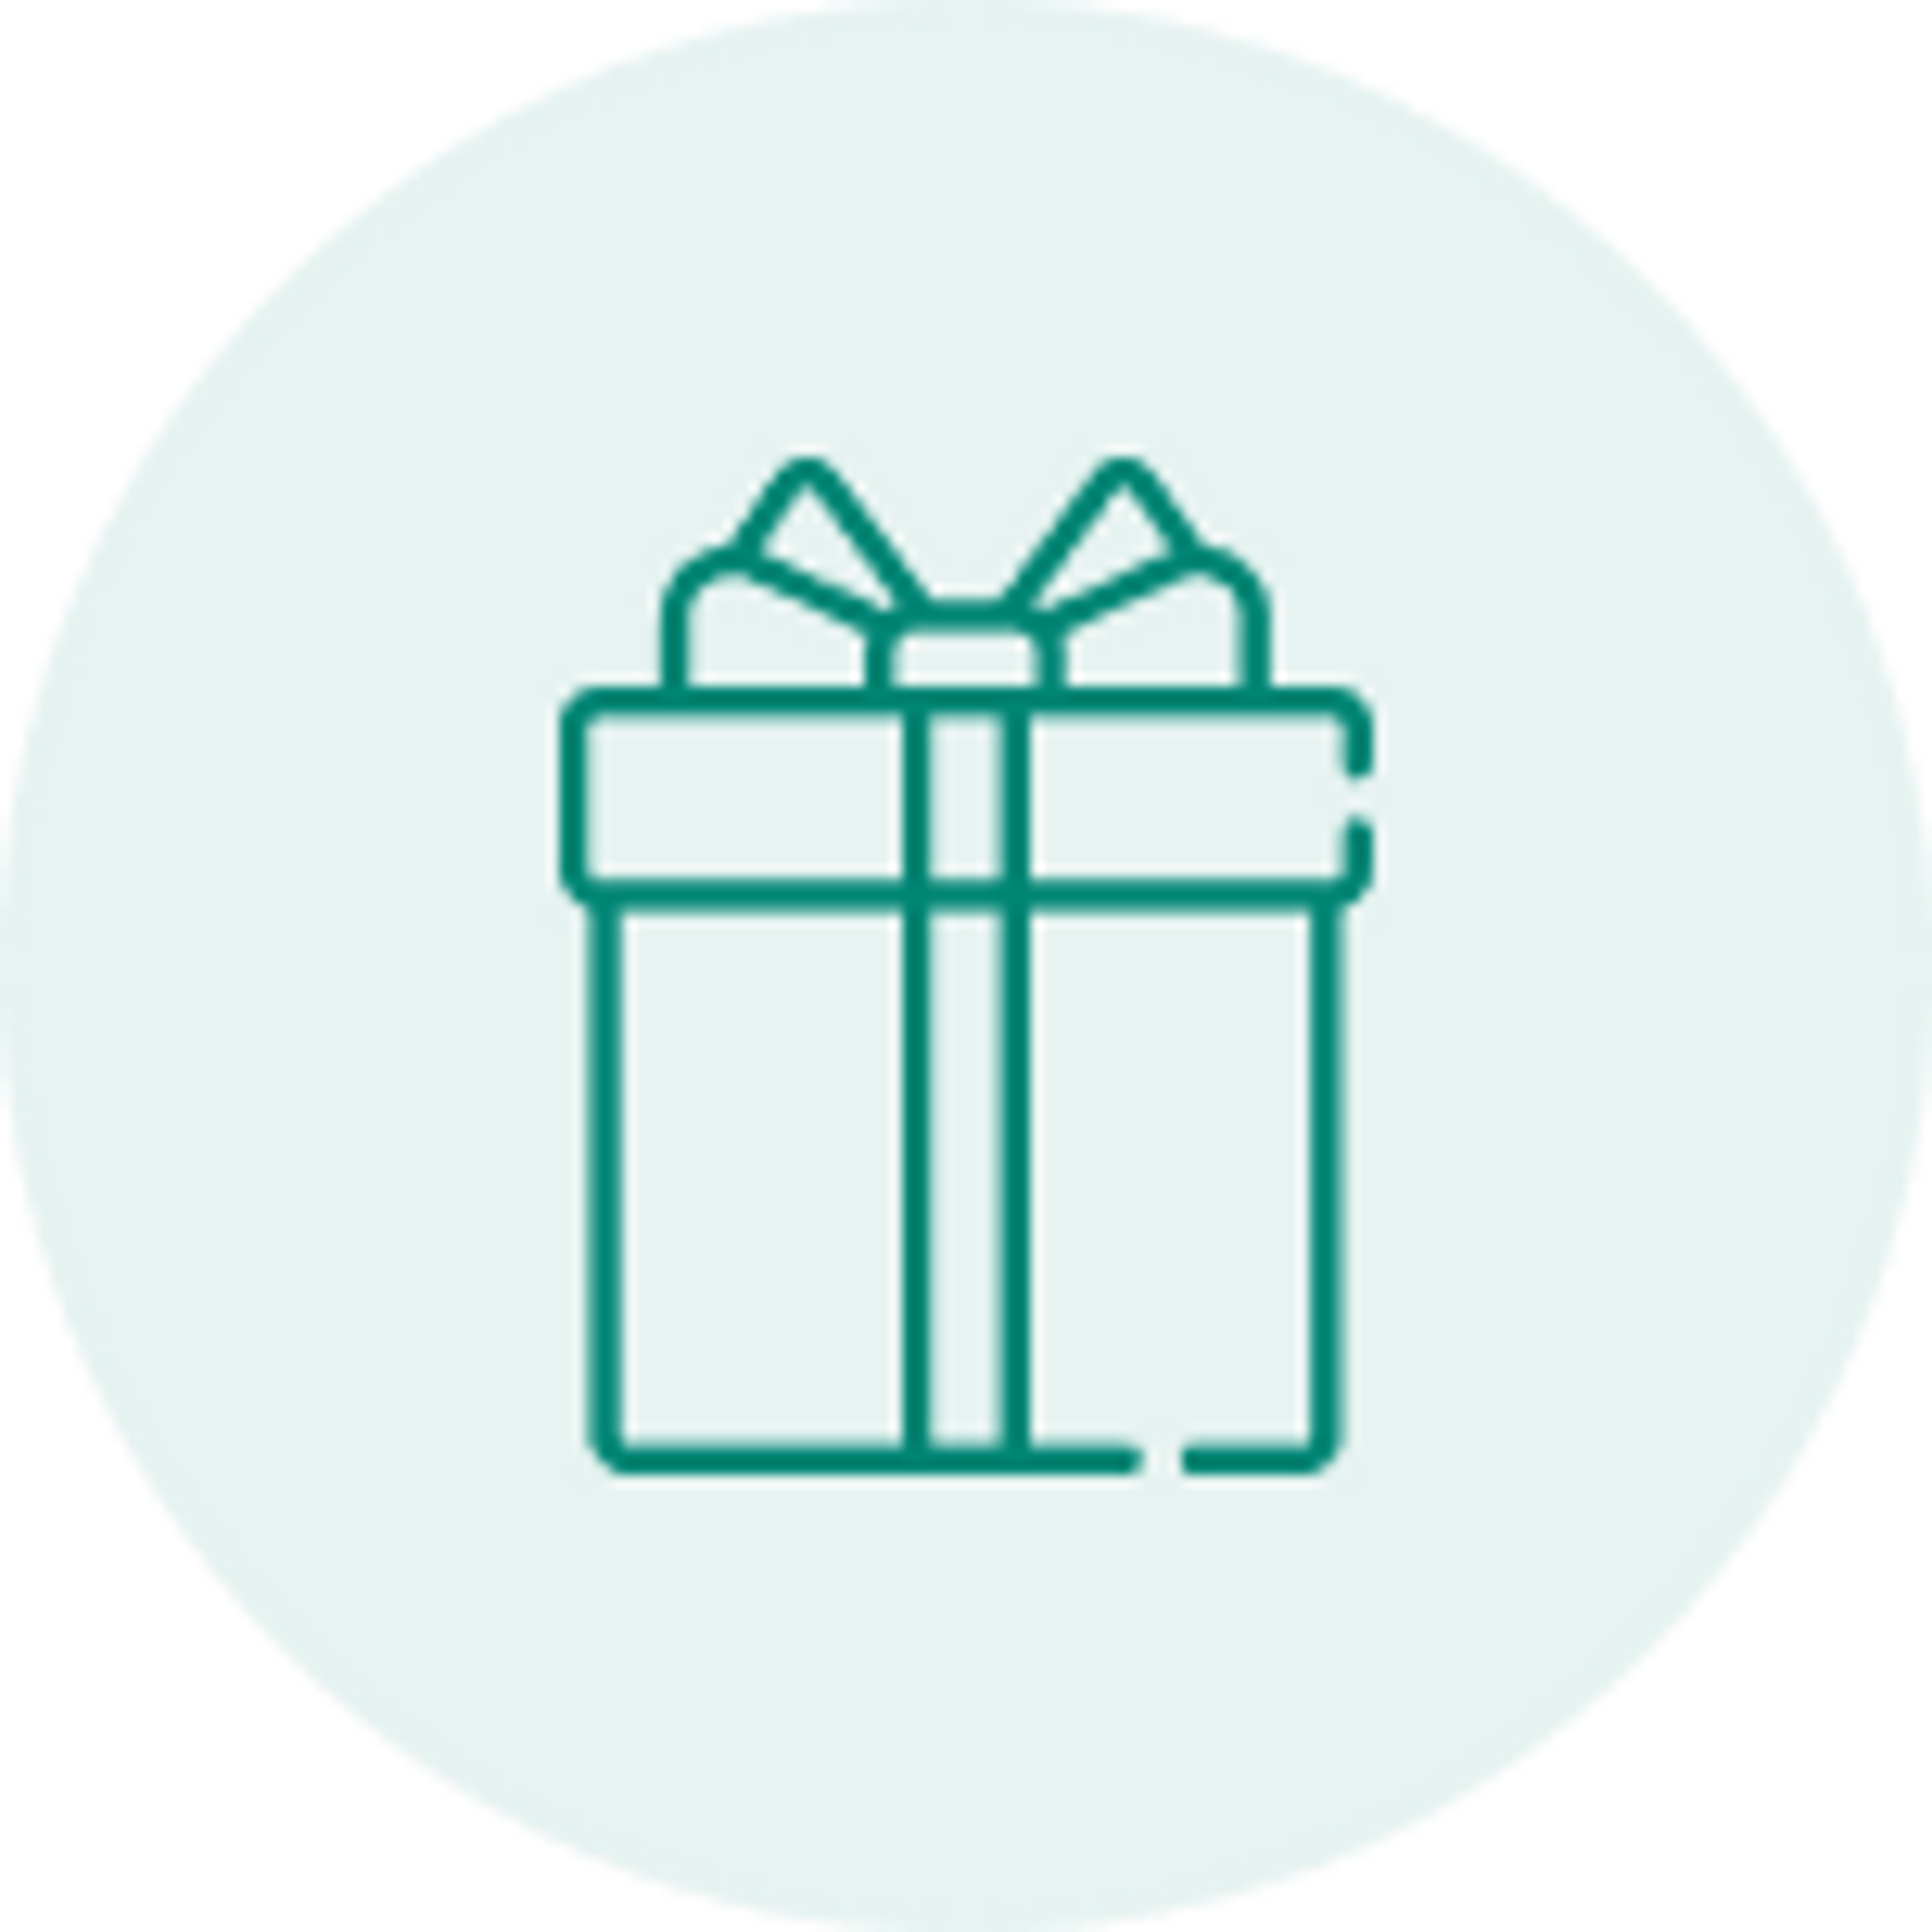 Icon representing a gift box for just because gifts